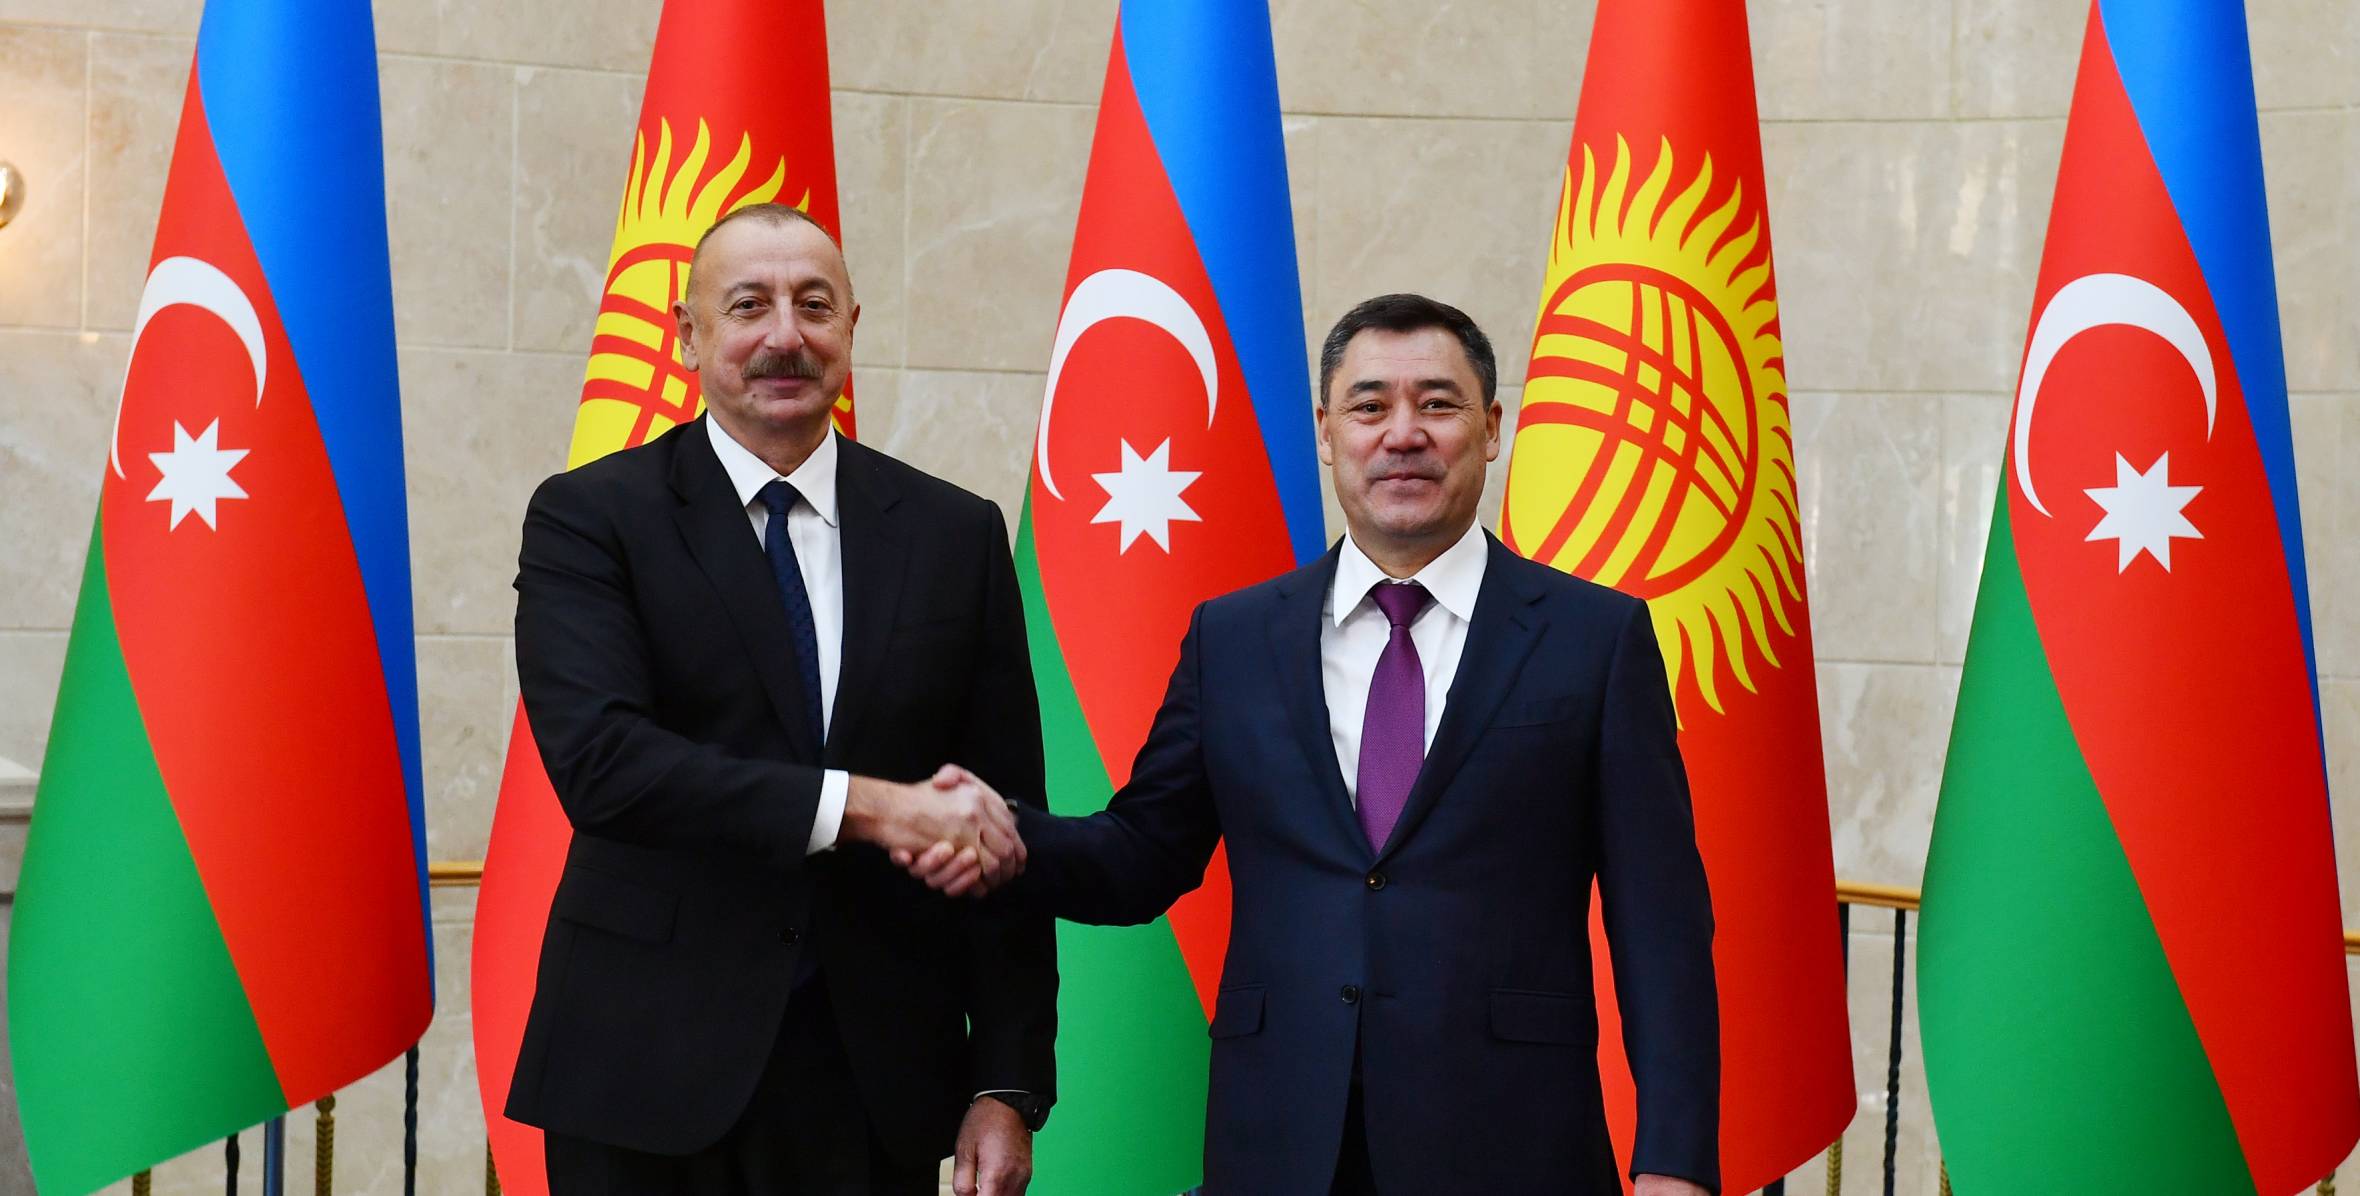 Official welcome ceremony was held for Ilham Aliyev in Bishkek